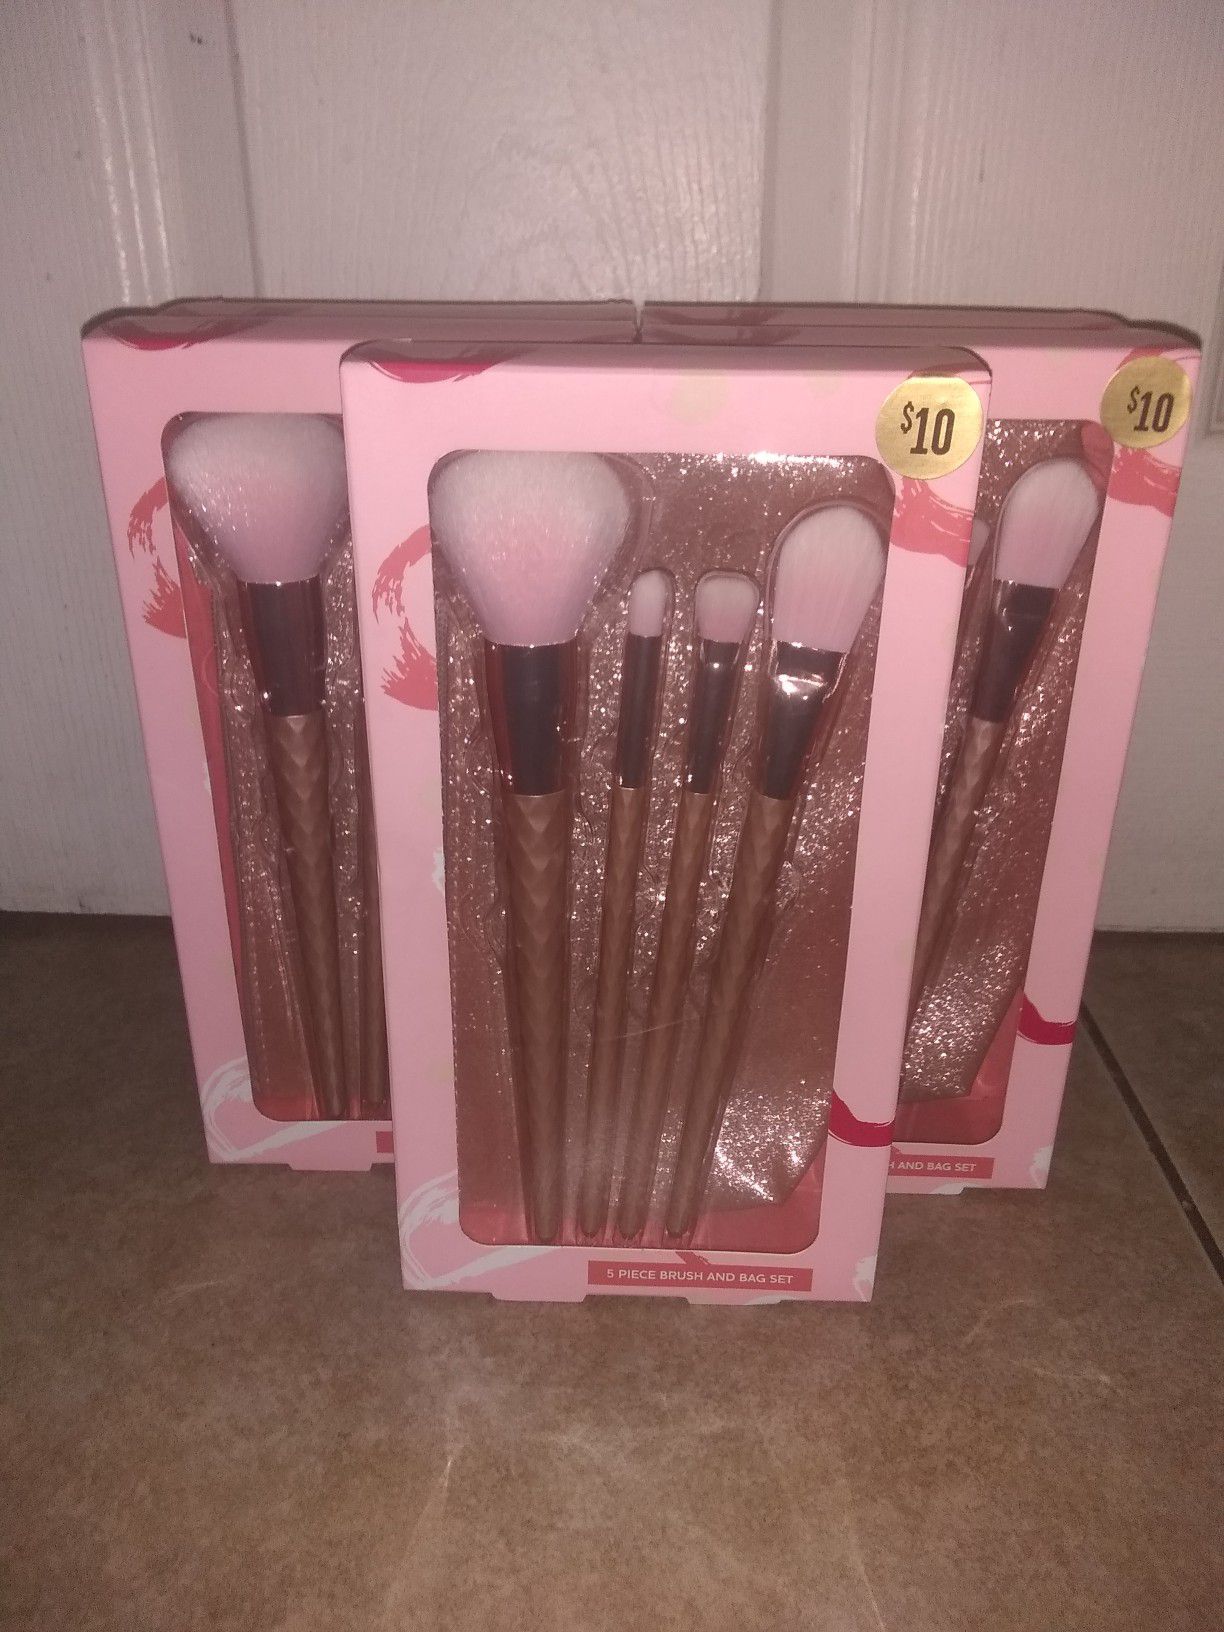 Makeup Brushes $4 each.